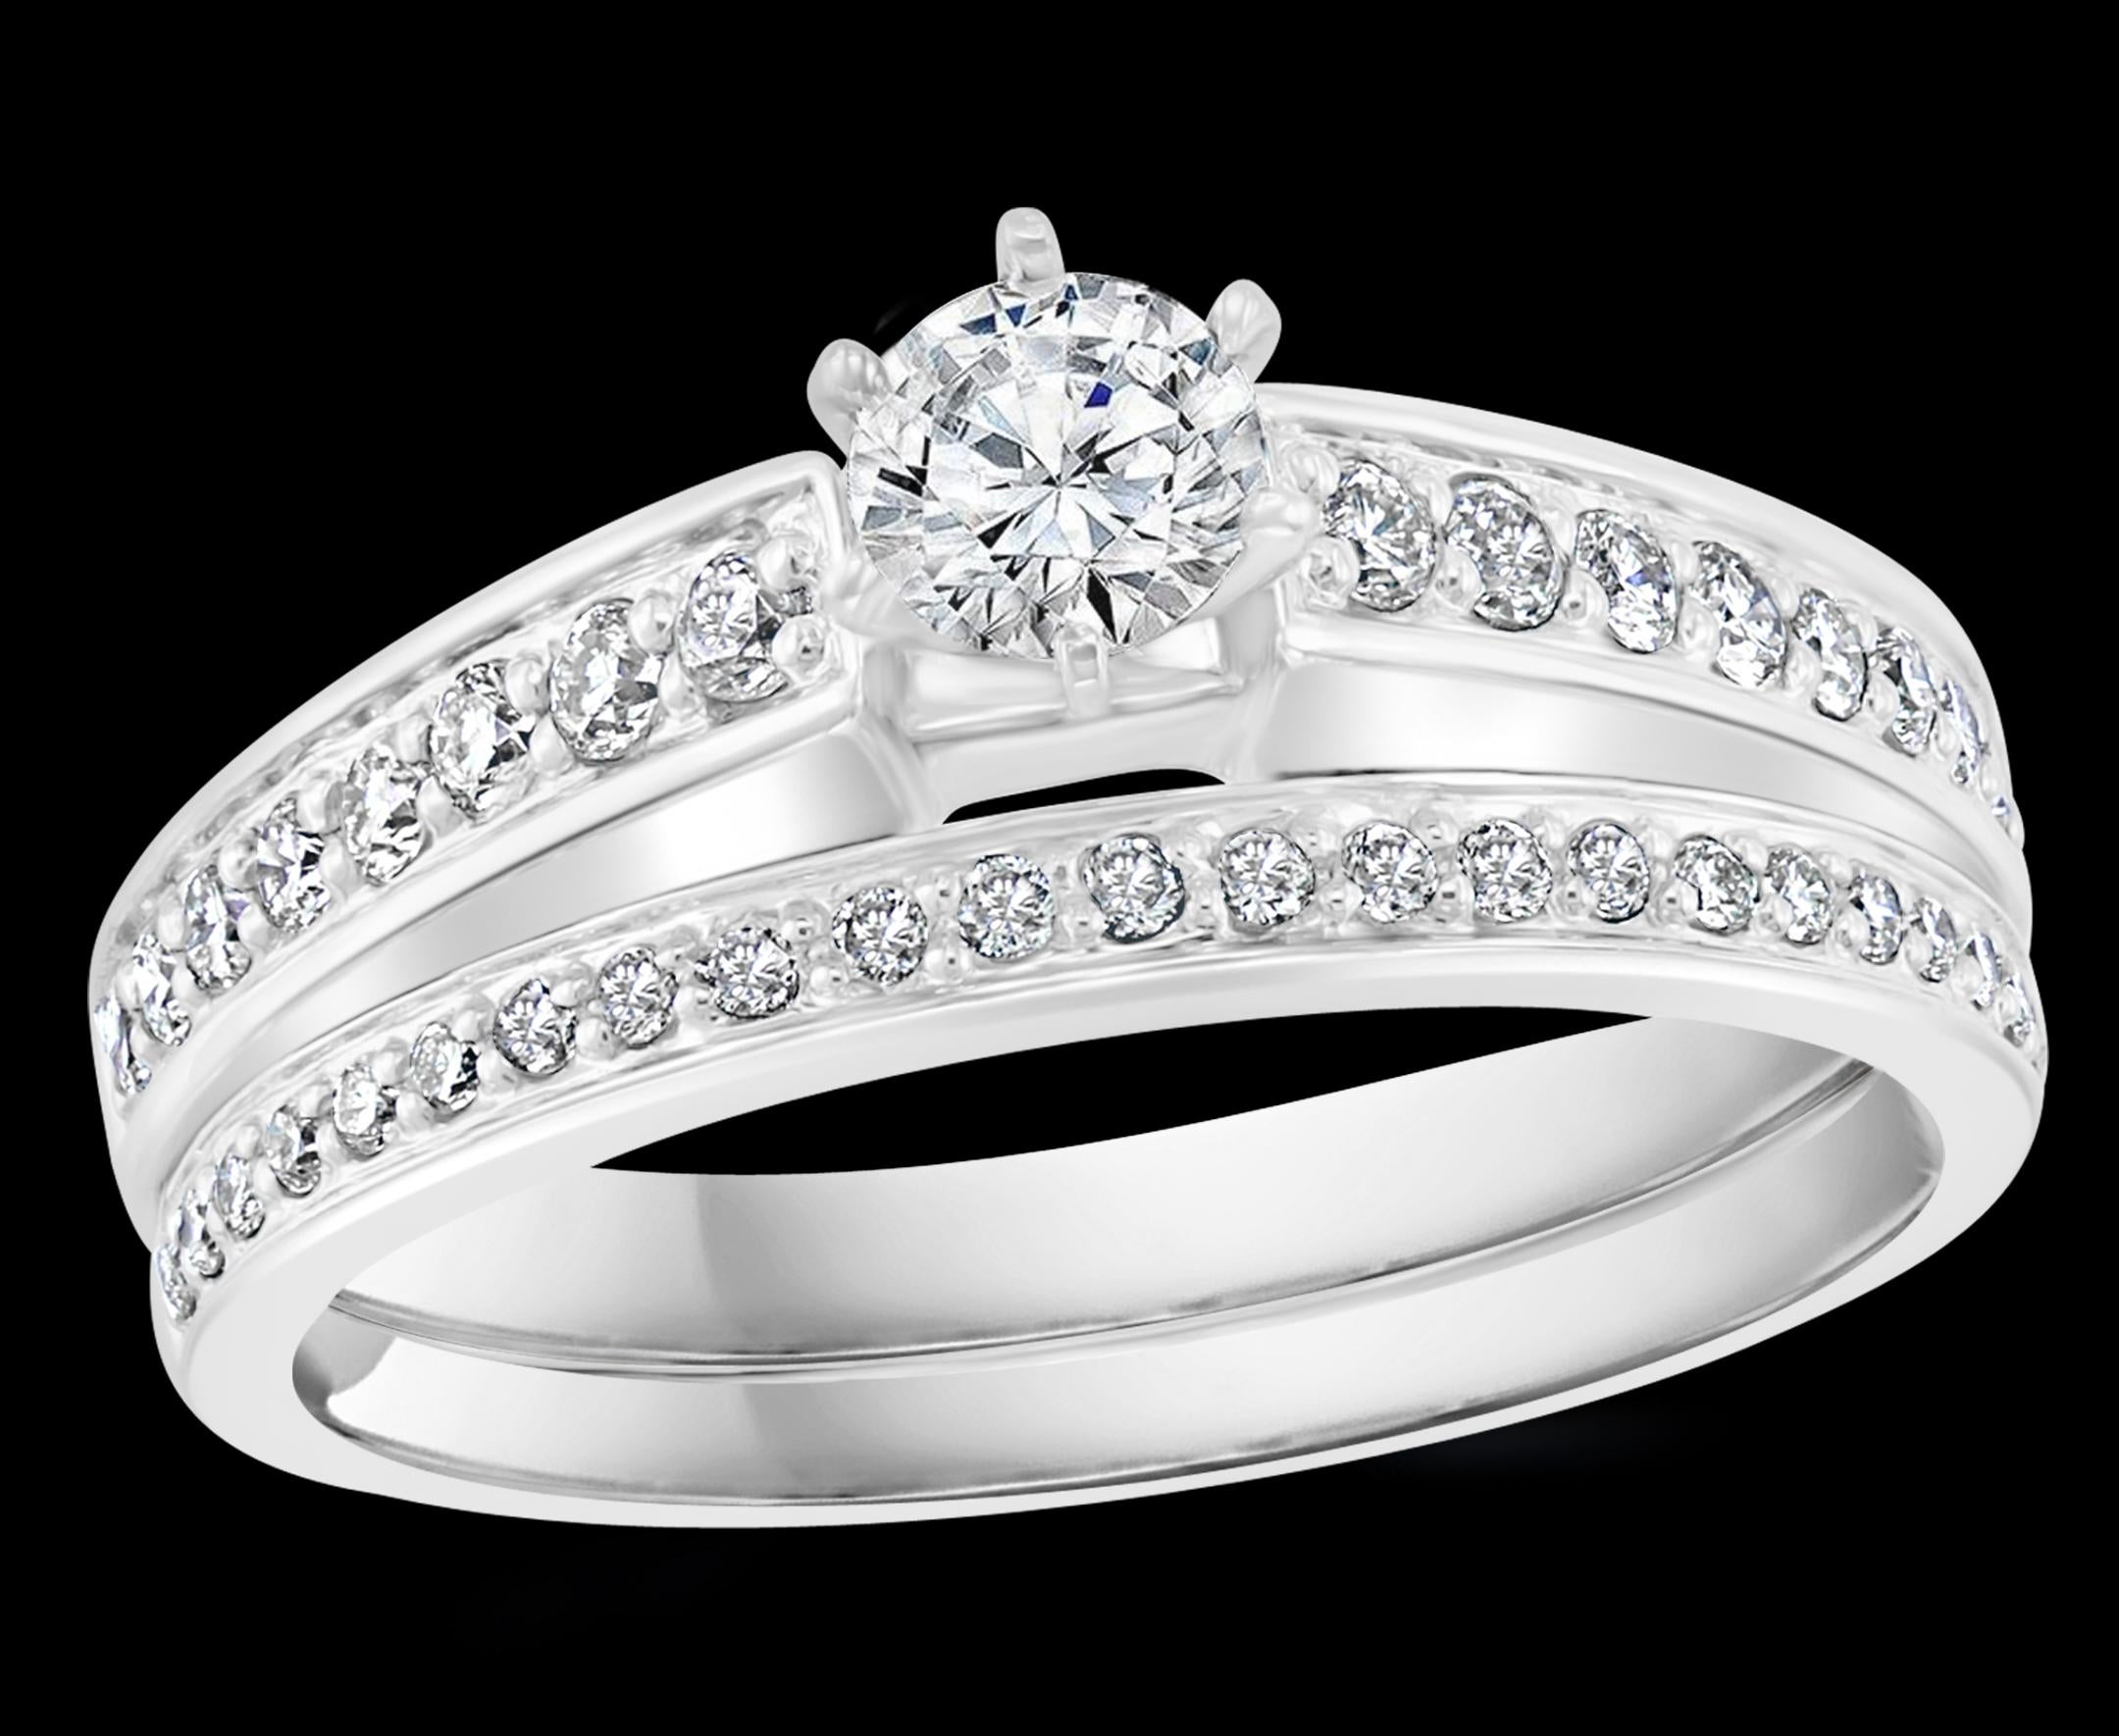 0.8 Carat  Total Diamond weight with 0.20 carat Solitaire Round Center Diamond Engagement 14 White Gold Ring + Band
Prong set
14 K gold Stamped 
Diamond VS2 quality and G color.
Very Clean diamonds.
Round brilliant cut diamonds are on either side of